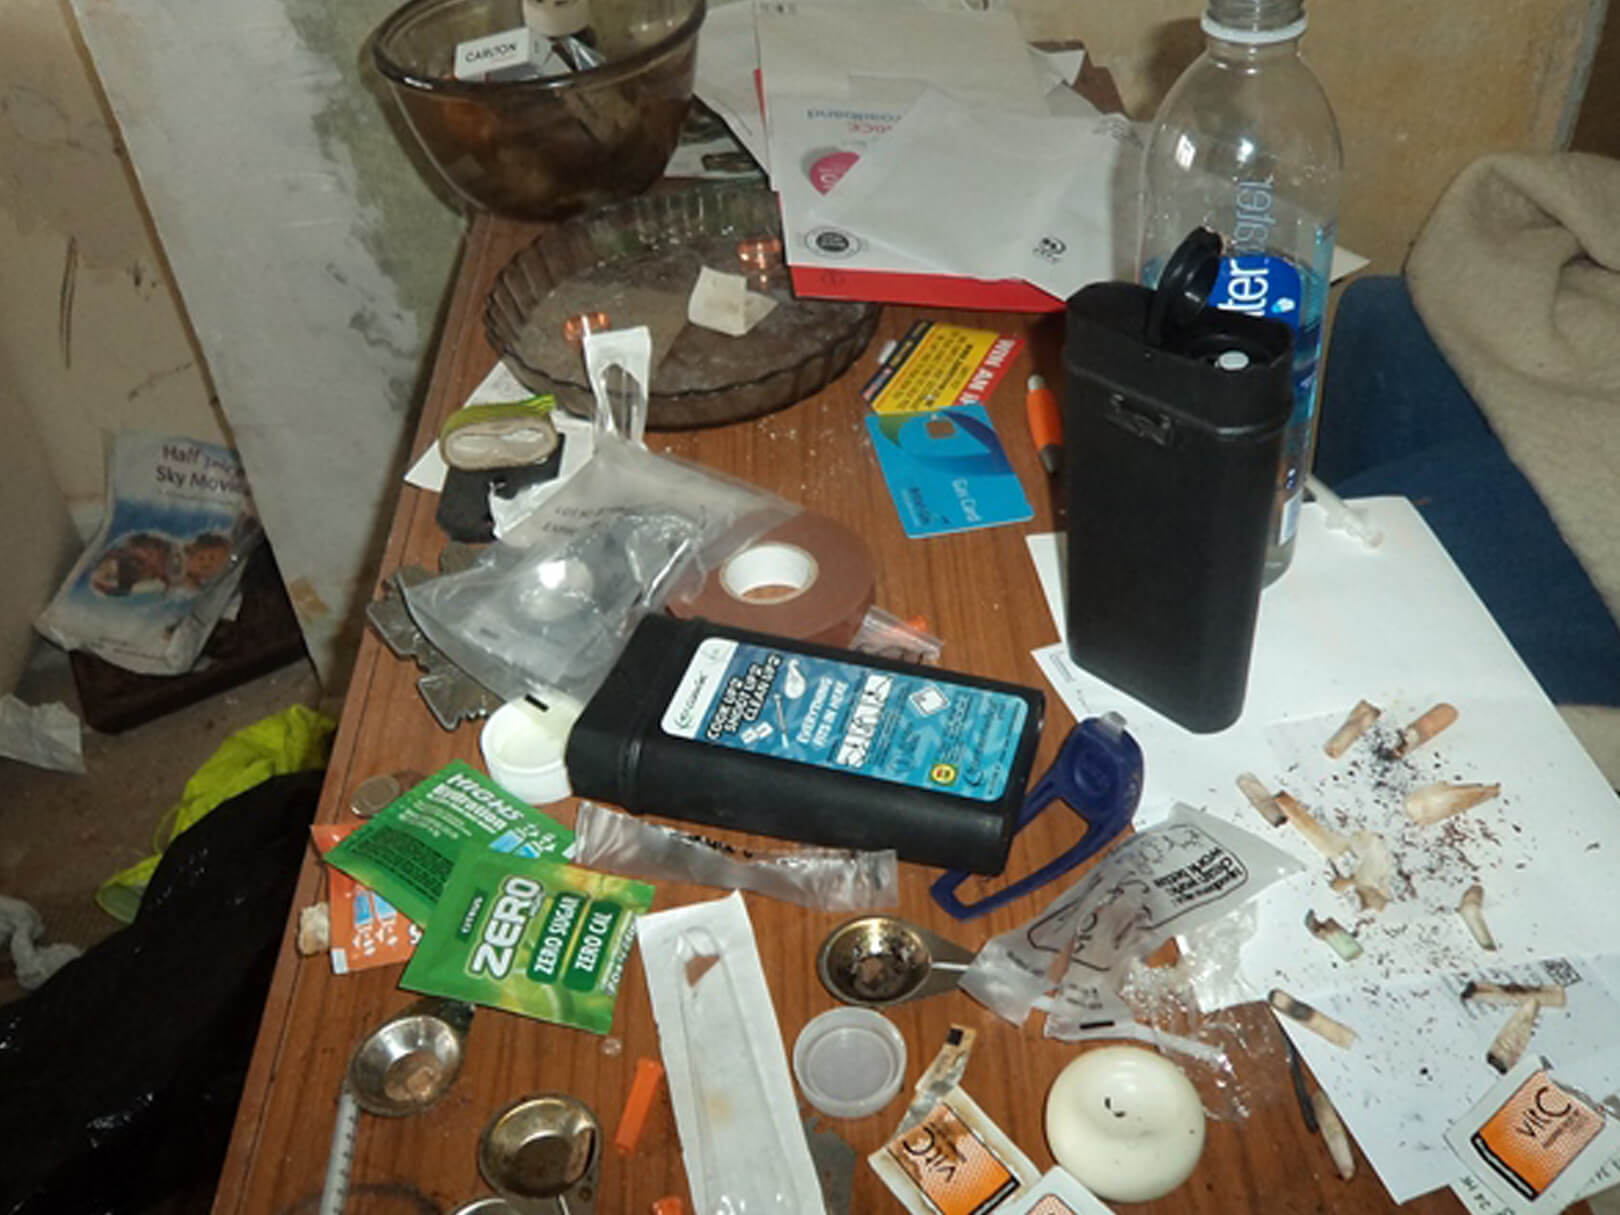 Needles and waste inside residential home